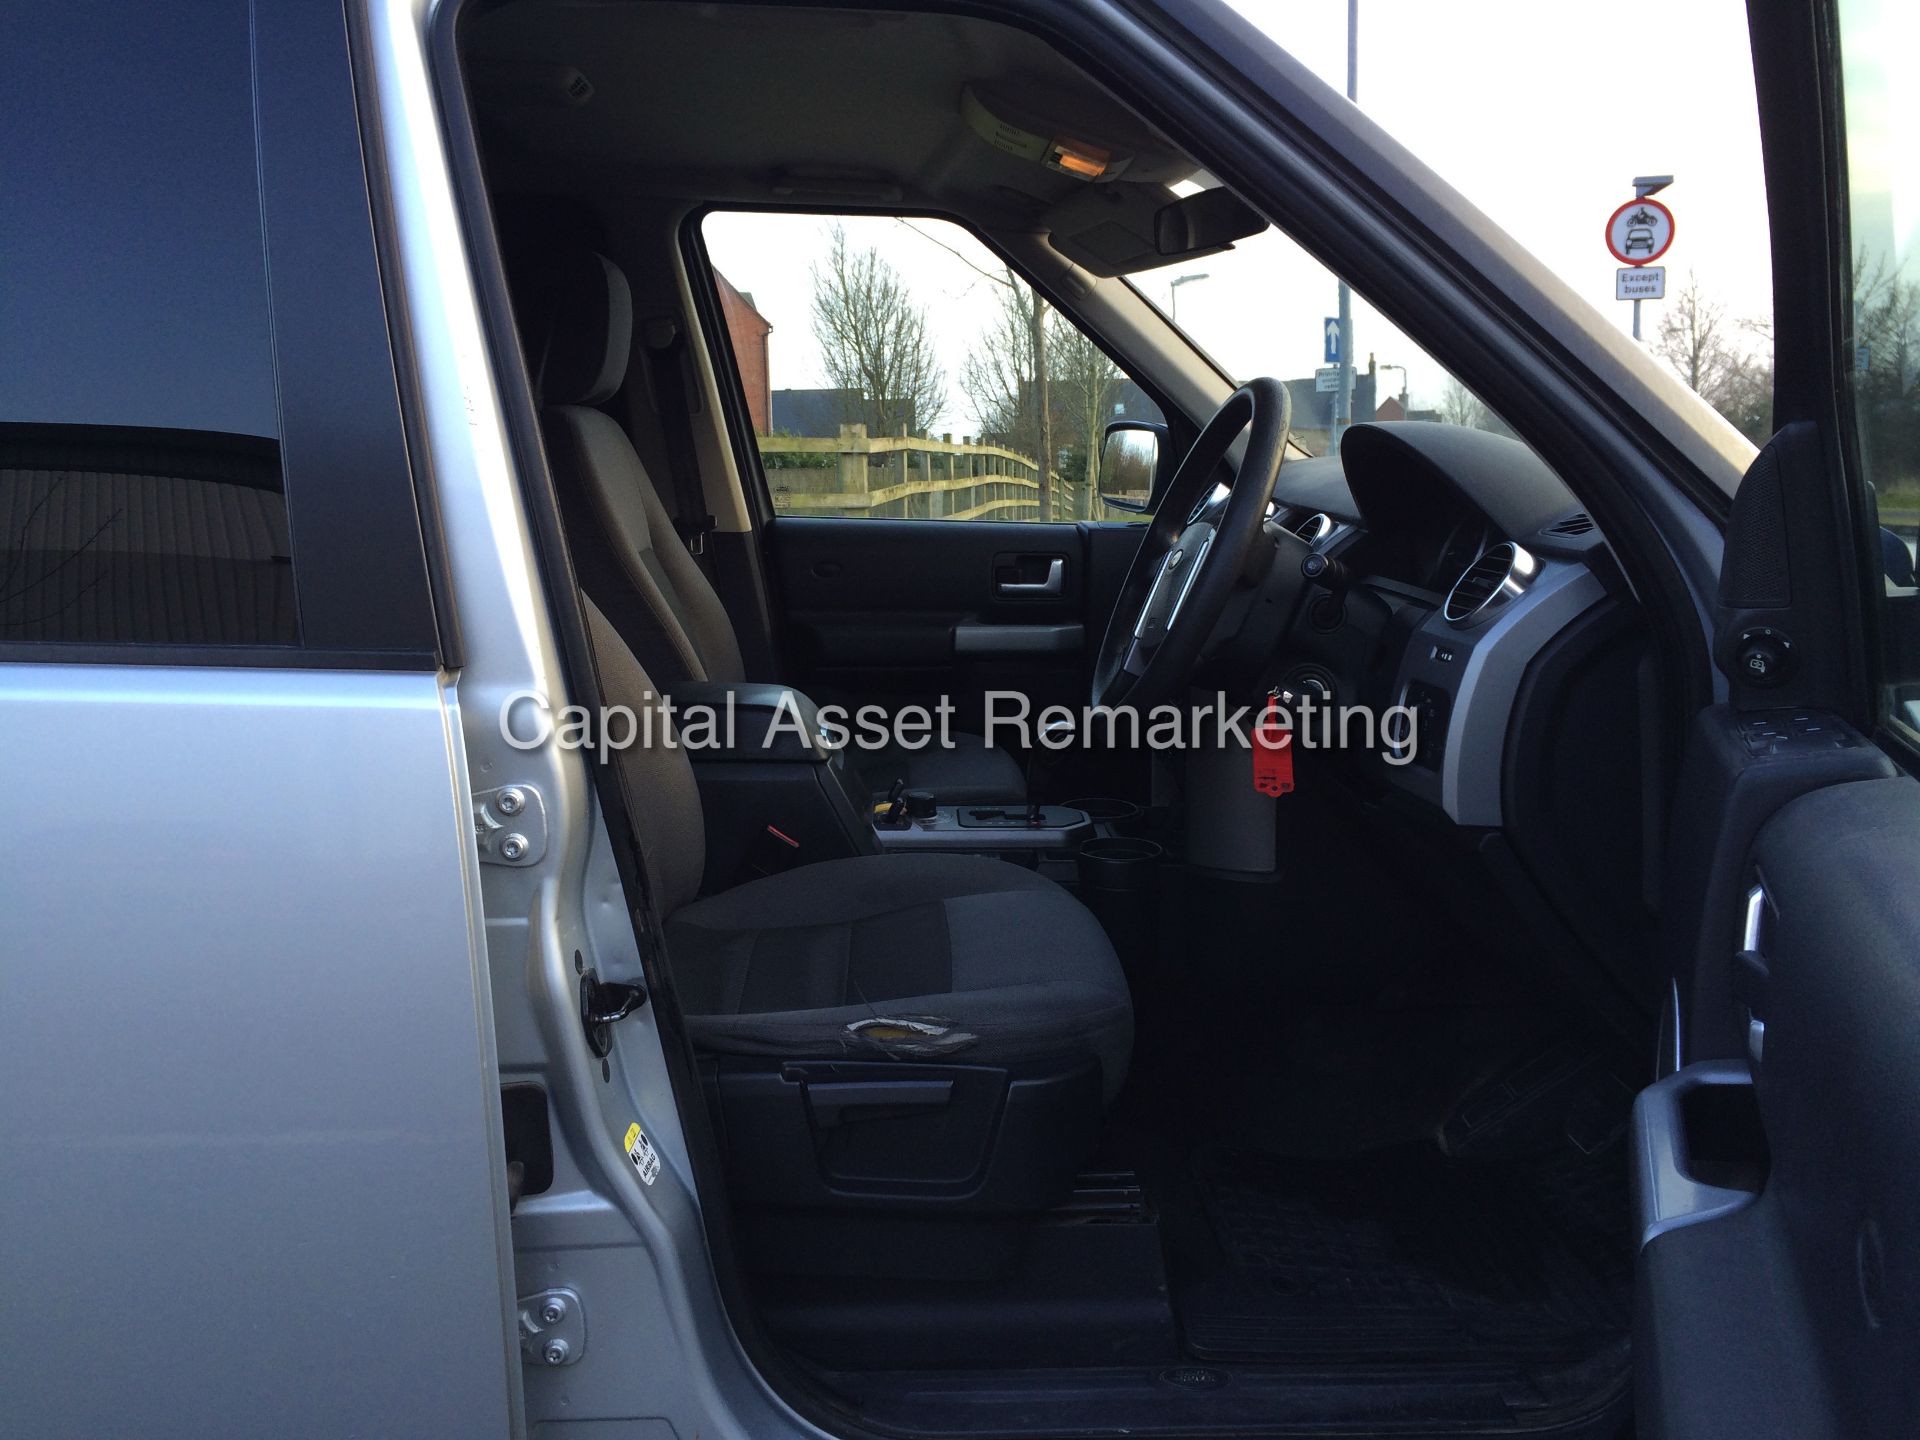 LANDROVER DISCOVERY 3 "TDV6" AUTOMATIC - 1 PREVIOUS OWNER FROM NEW - AIR SUSPENSION - PRIVACY GLASS! - Image 9 of 18